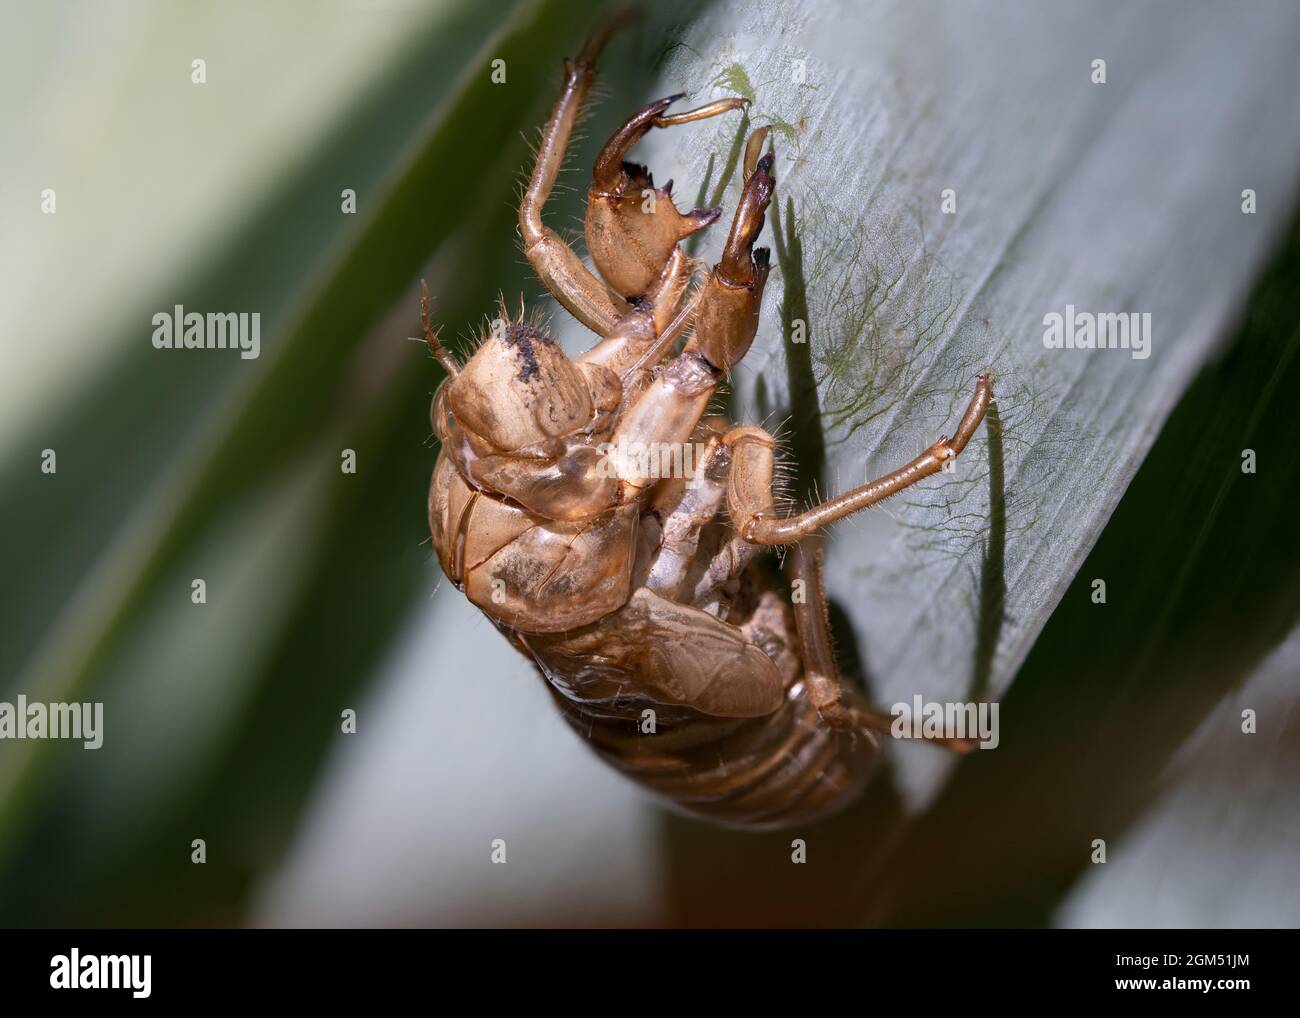 An empty, discarded shell of a 17-year cicada clings hallow to a green leaf in the warm sunshine. Stock Photo